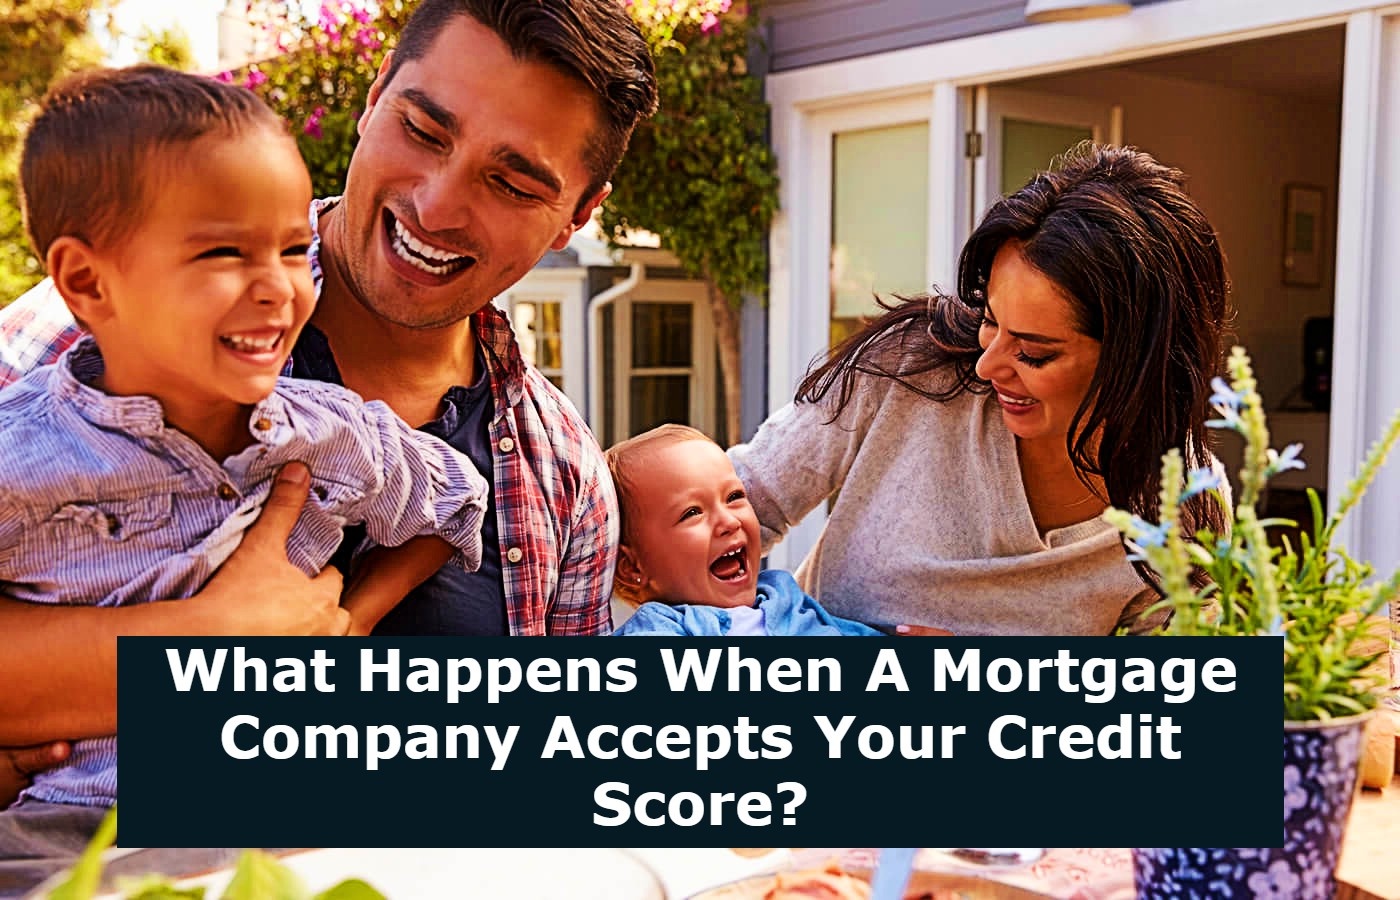 What Happens When A Mortgage Company Accepts Your Credit Score?